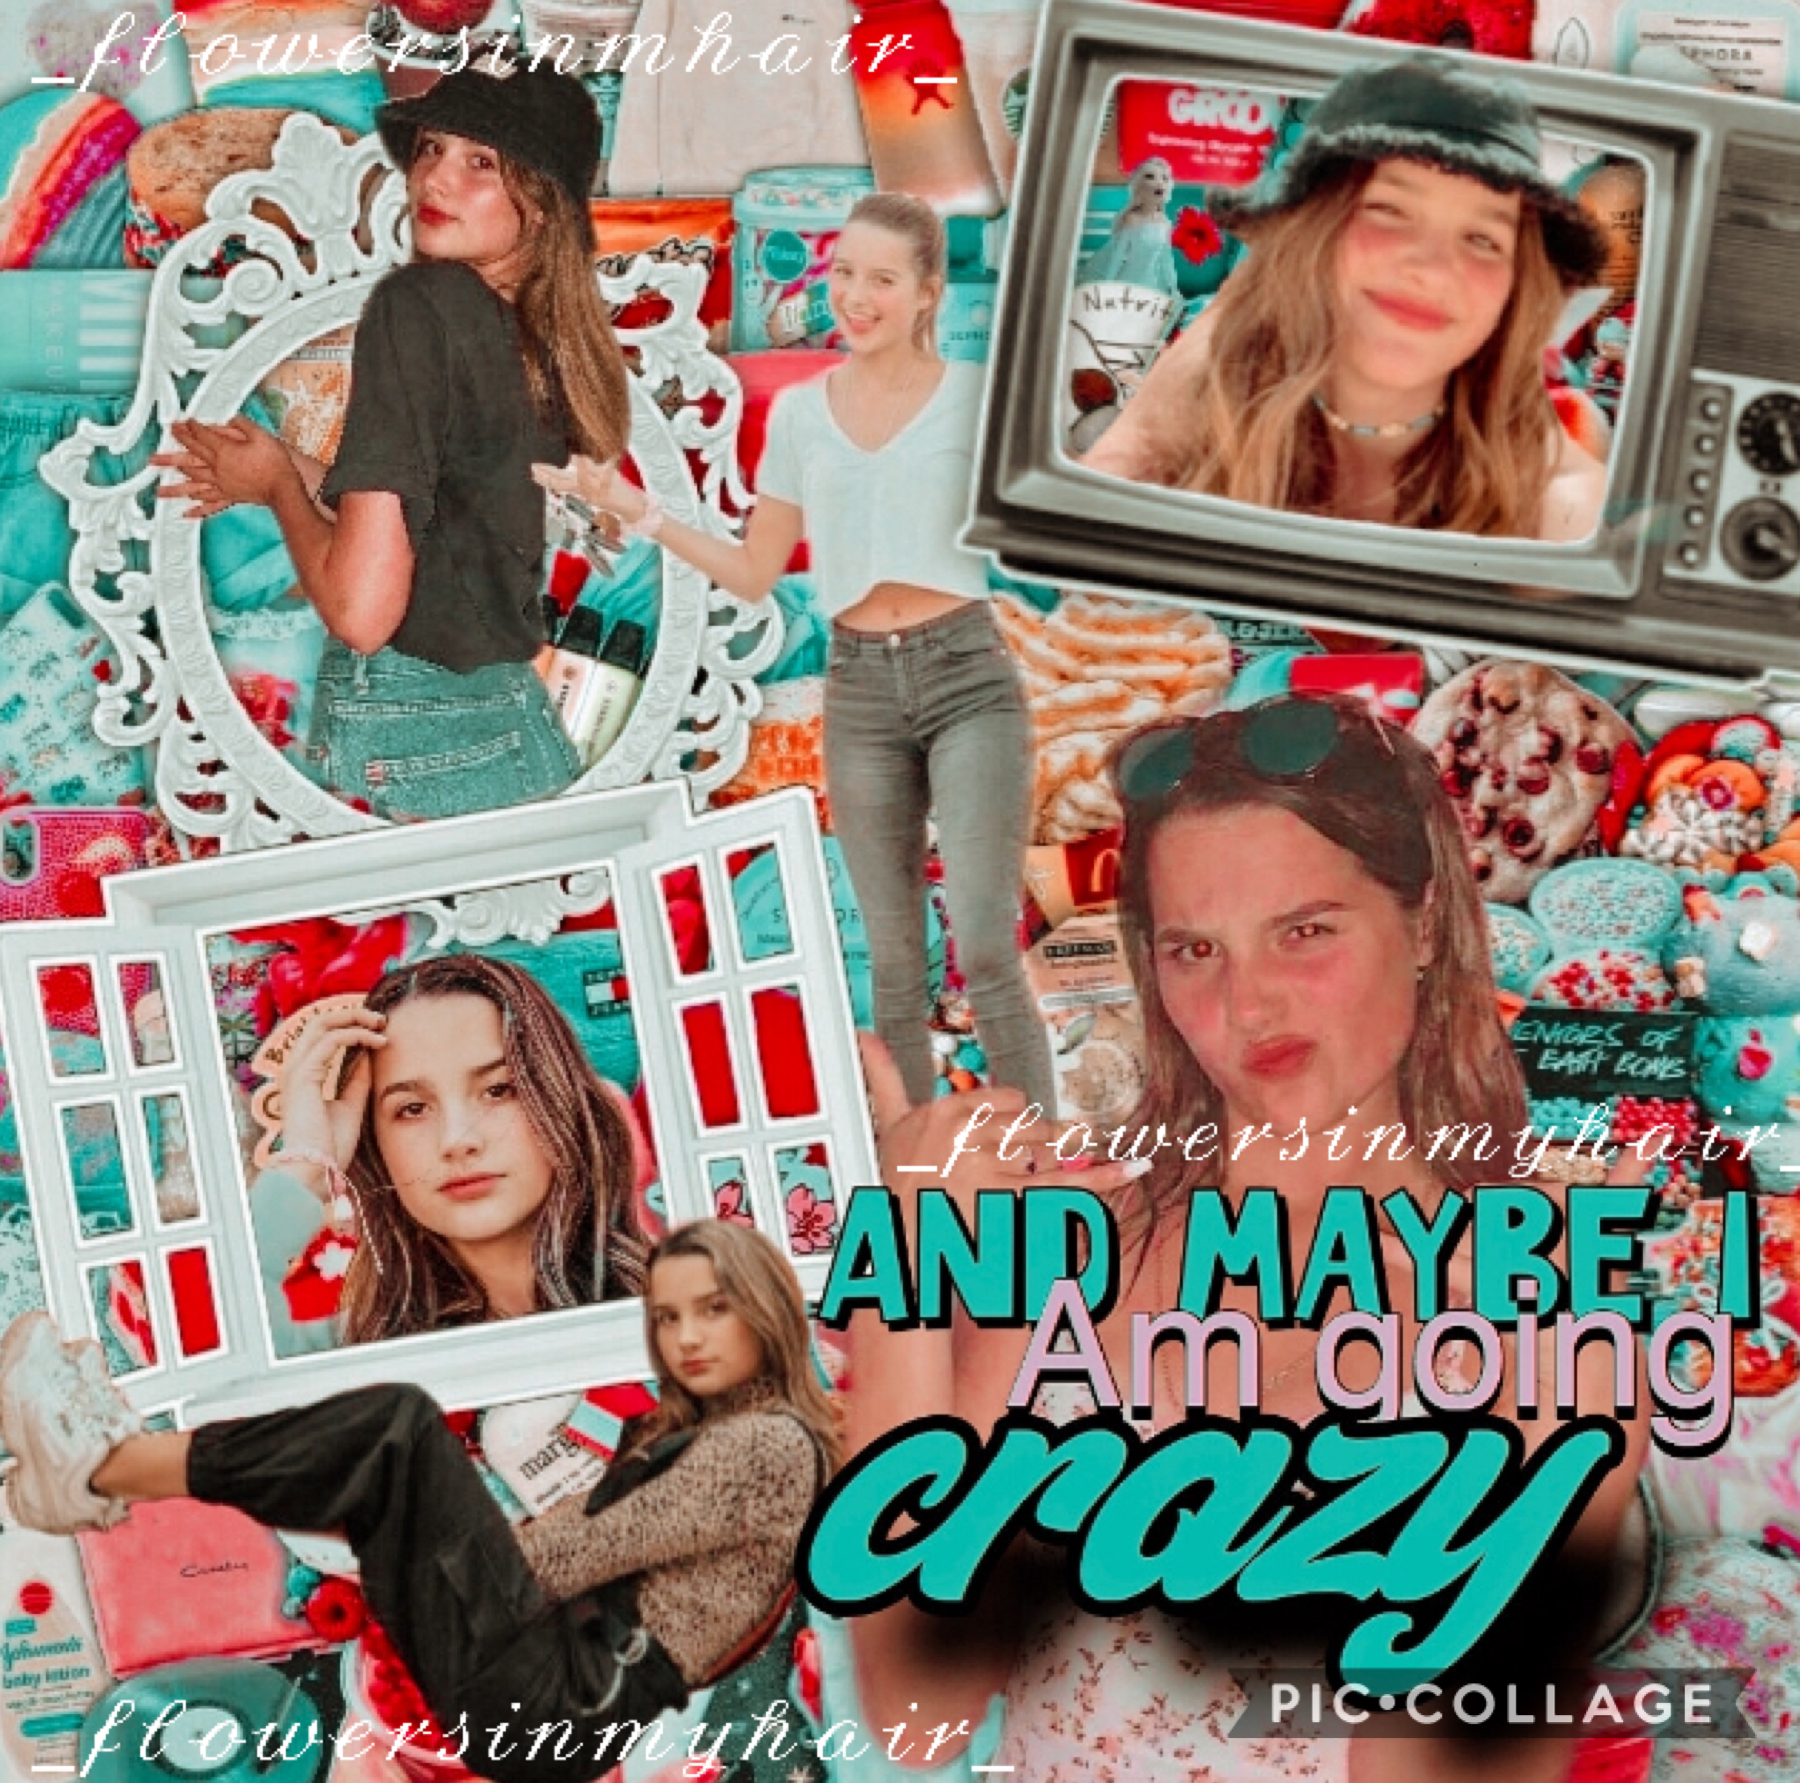          🄲🄻🄸🄲🄺
Sorry I haven’t posted in a while. Here’s an edit if Annie!! I made my own stickers and text! Made on Picsart! I am very proud of it! Luv y’all!